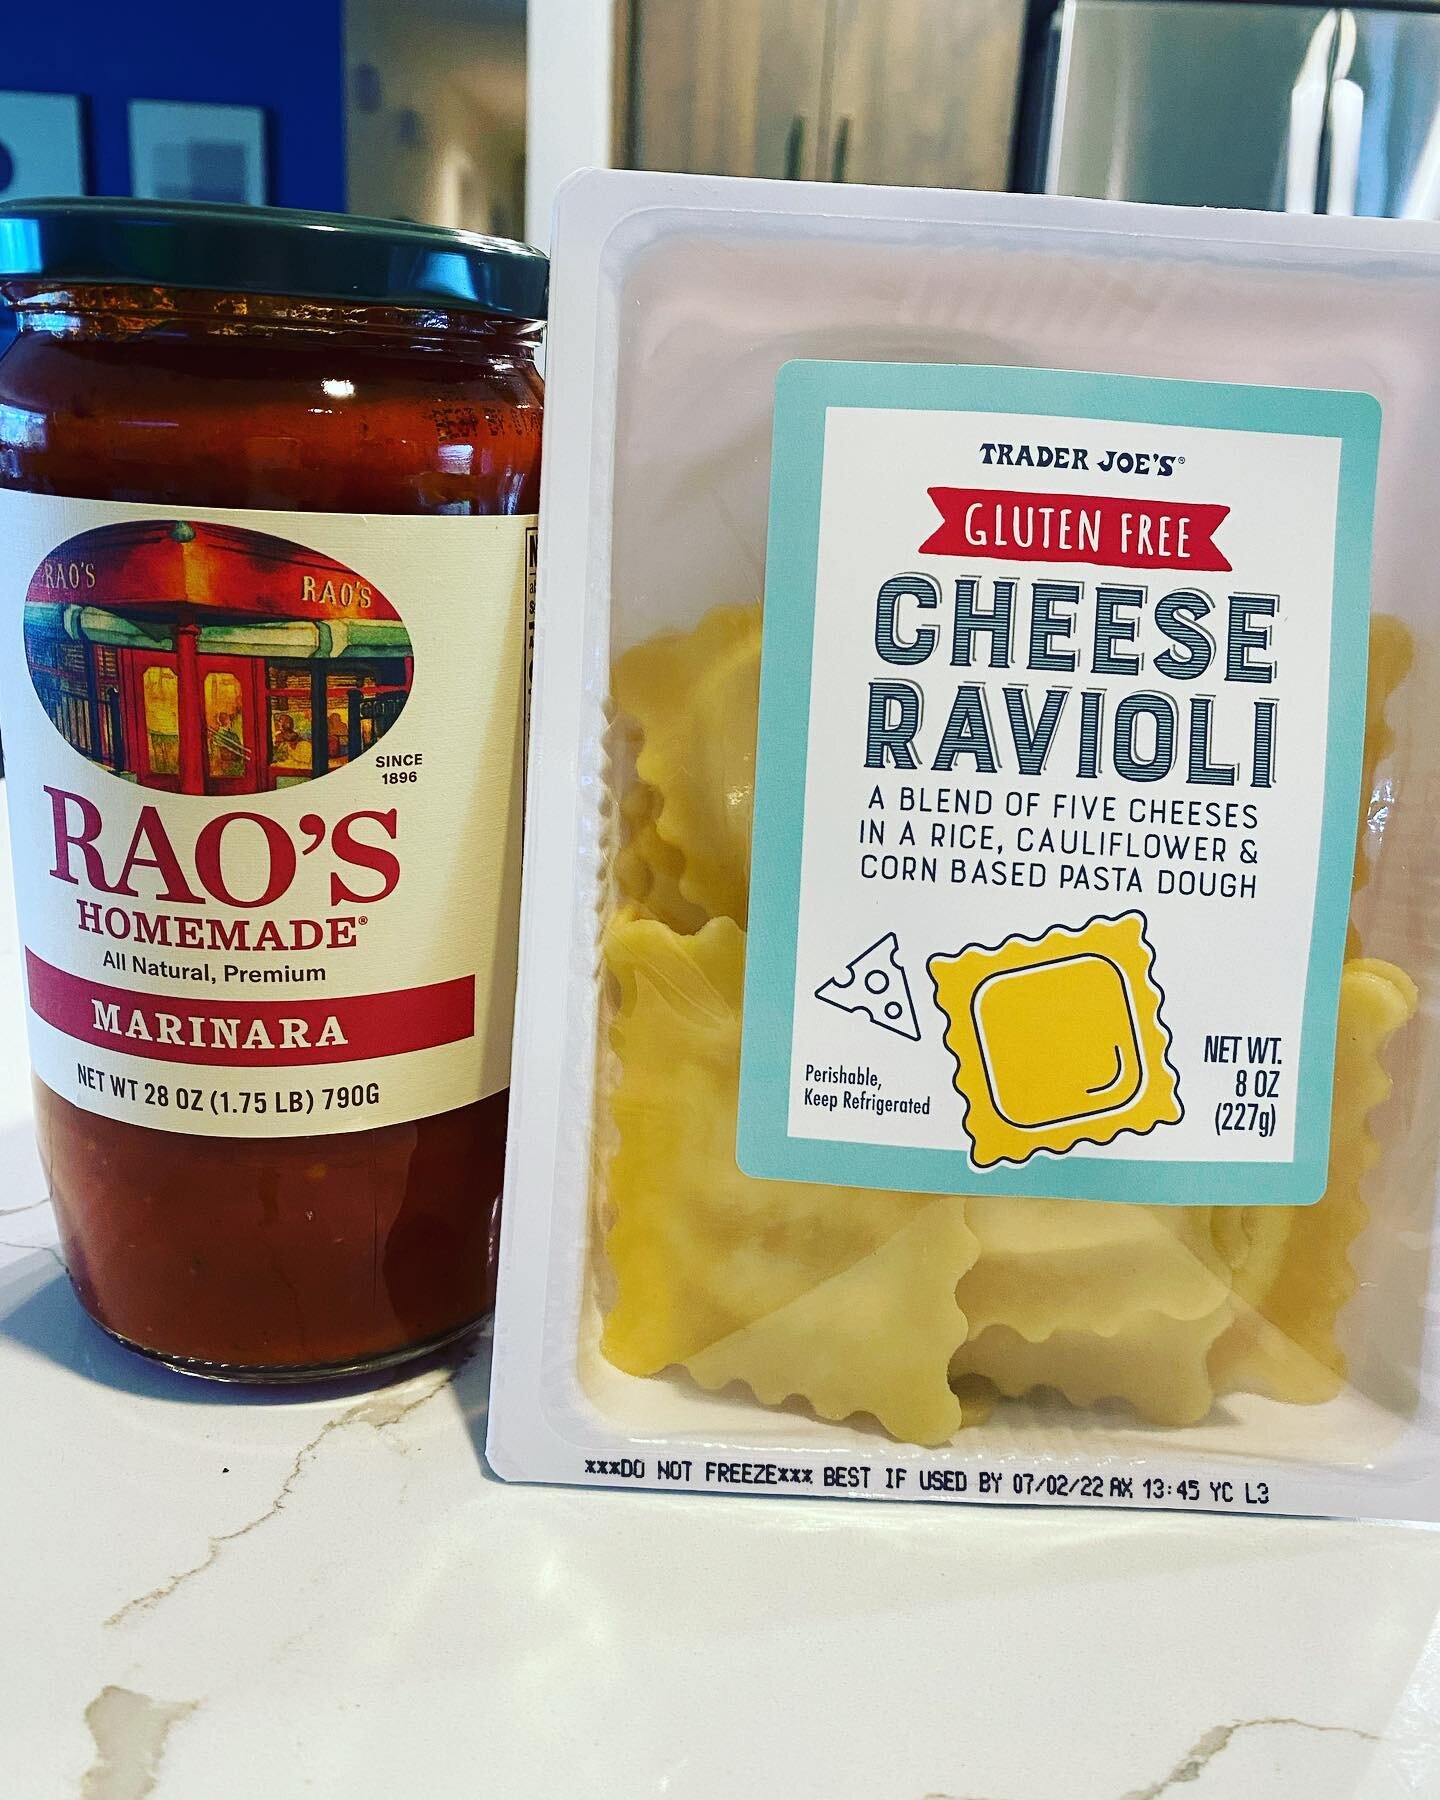 #celiacs rejoice!!! @traderjoes #glutenfree cheese ravioli is everything you could ever hope for. Top with @raoshomemade marinara and precooked Italian sausage and you have a balanced meal in 15 min. #easymeals #celiacapproved #dietitian #dietitianap